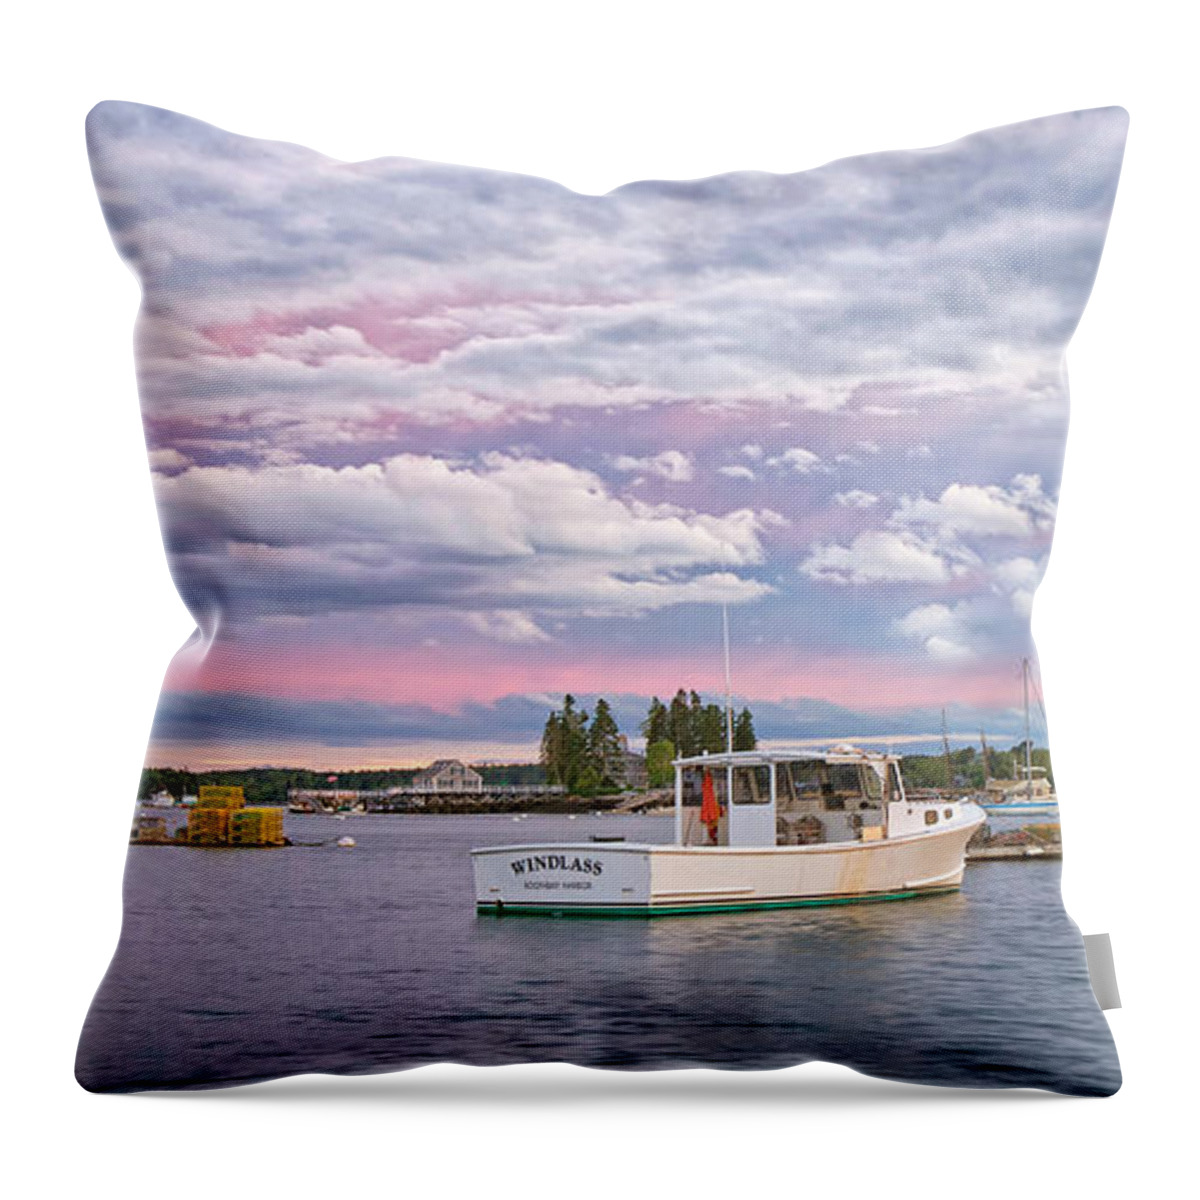 #boothbay#harbor#maine#summer#nights#boats#sunrise Throw Pillow featuring the photograph Sunrise on Boothbay Harbor by Darylann Leonard Photography